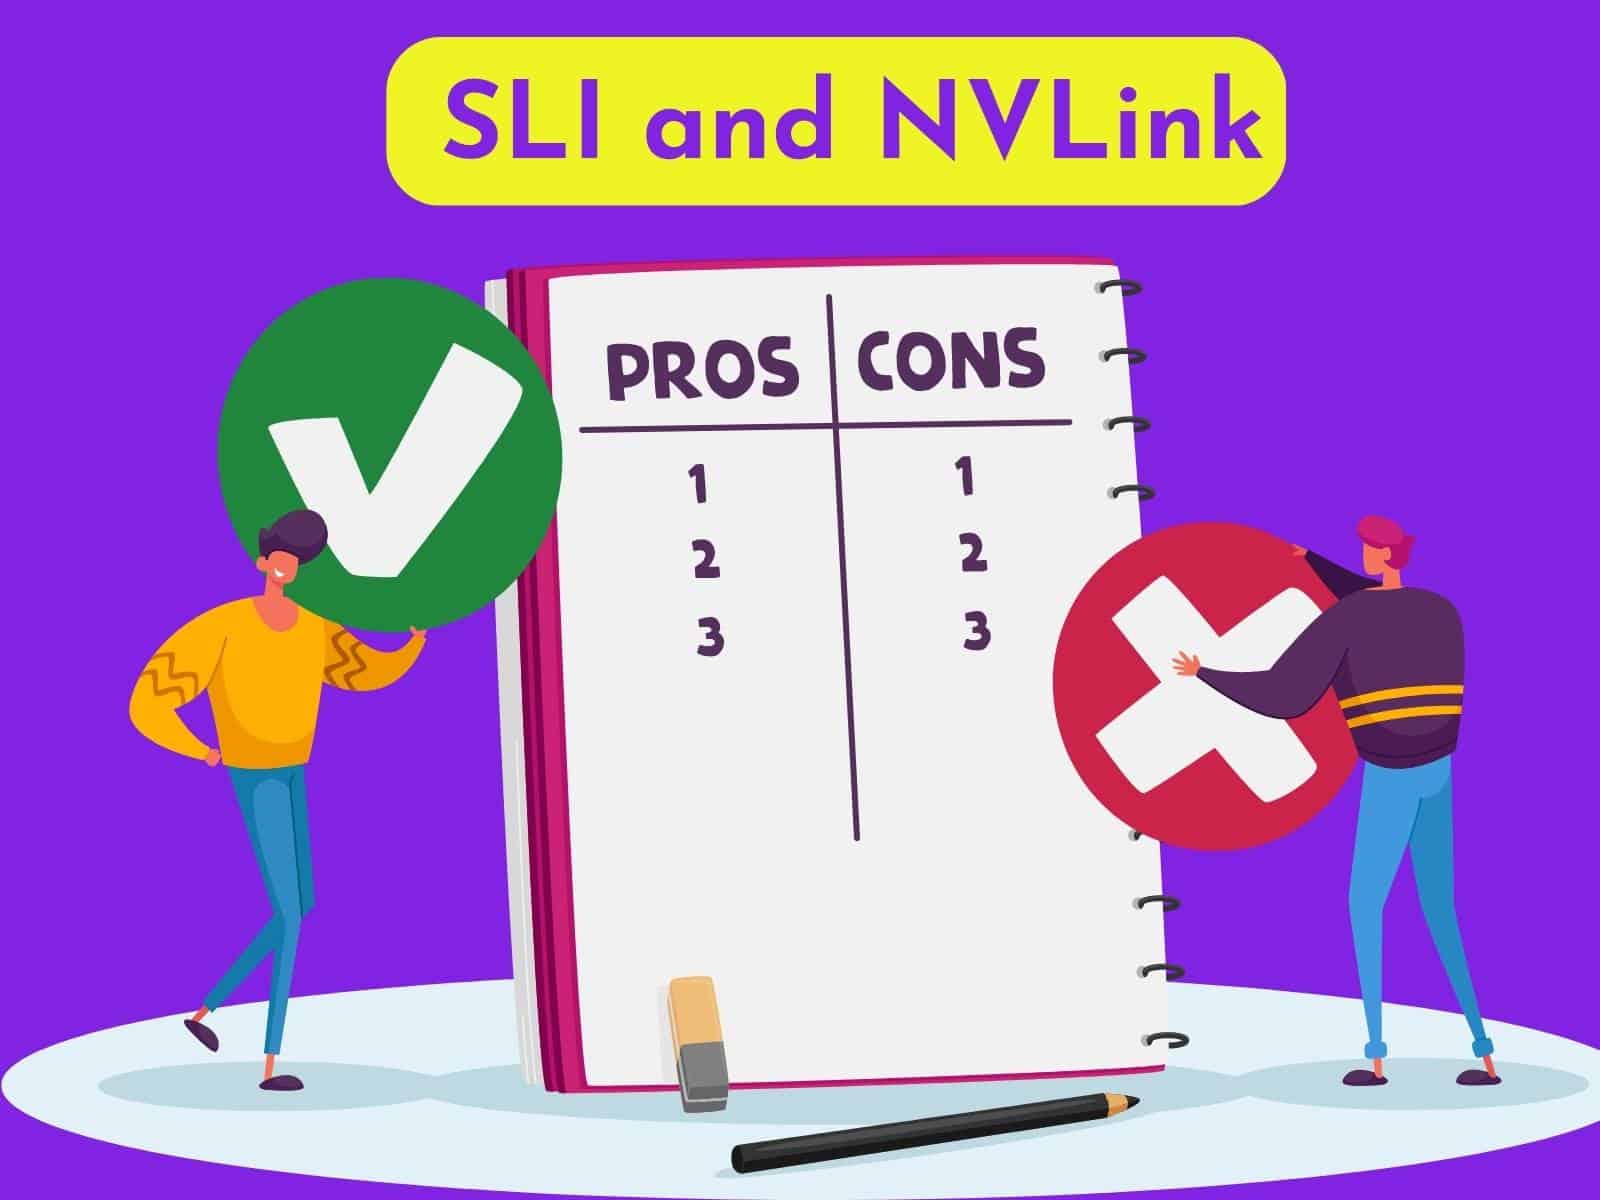 Pros and Cons of SLI and NVLink